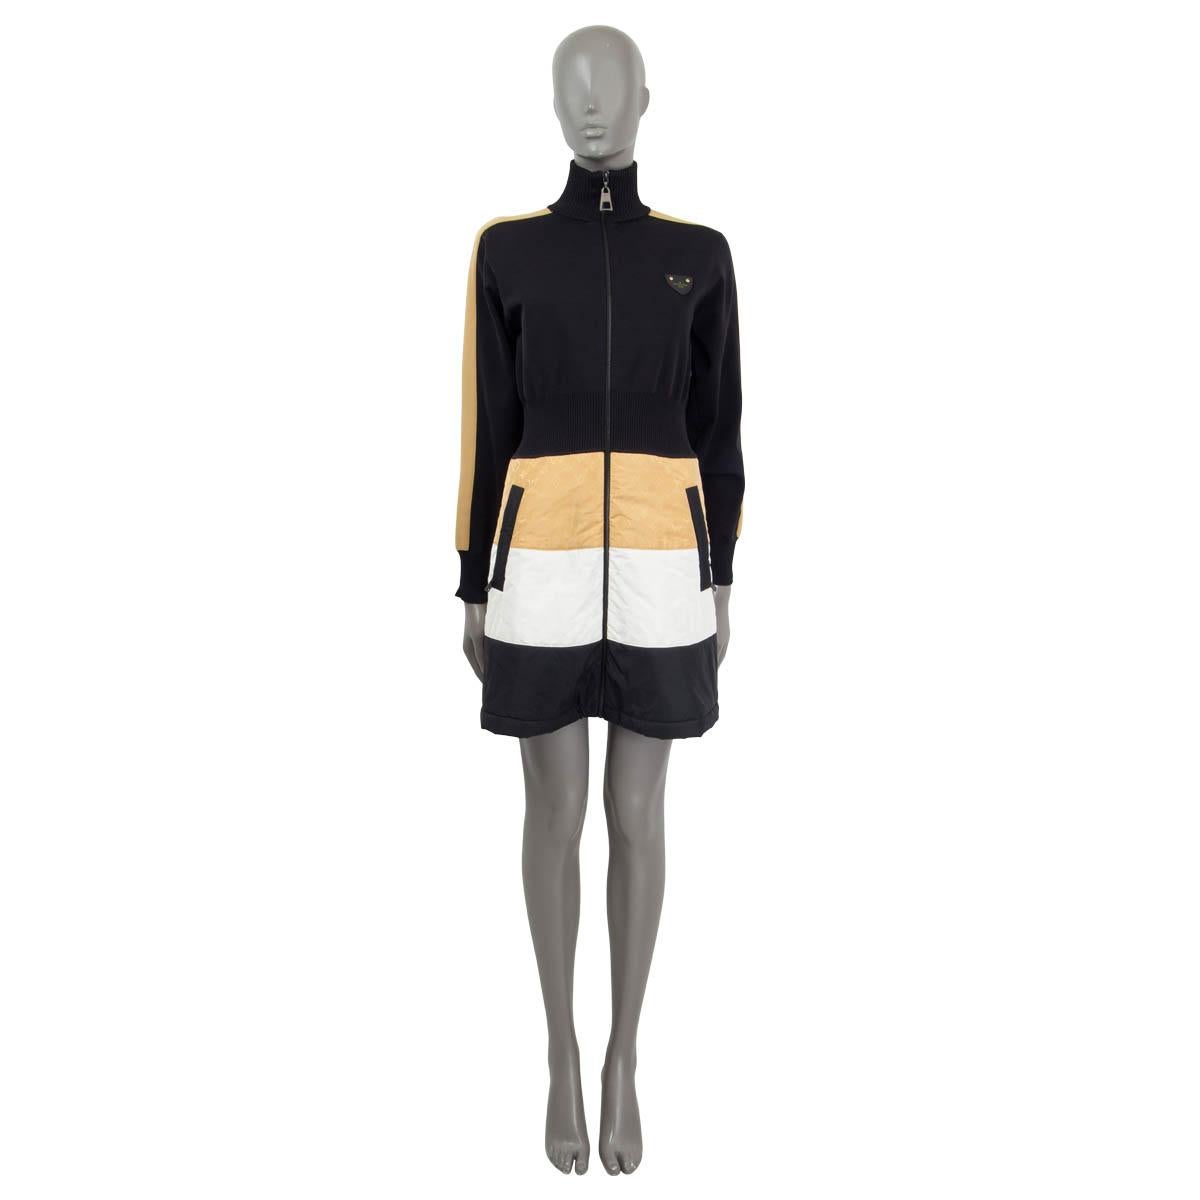 100% authentic Louis Vuitton bi-material dress with a knit top in black polyamide (100%) and a technical fabric skirt in matte black, white and honey monogram taffeta (60% polyamide, 24% polyester and 16% silk). Features long raglan sleeves (sleeve